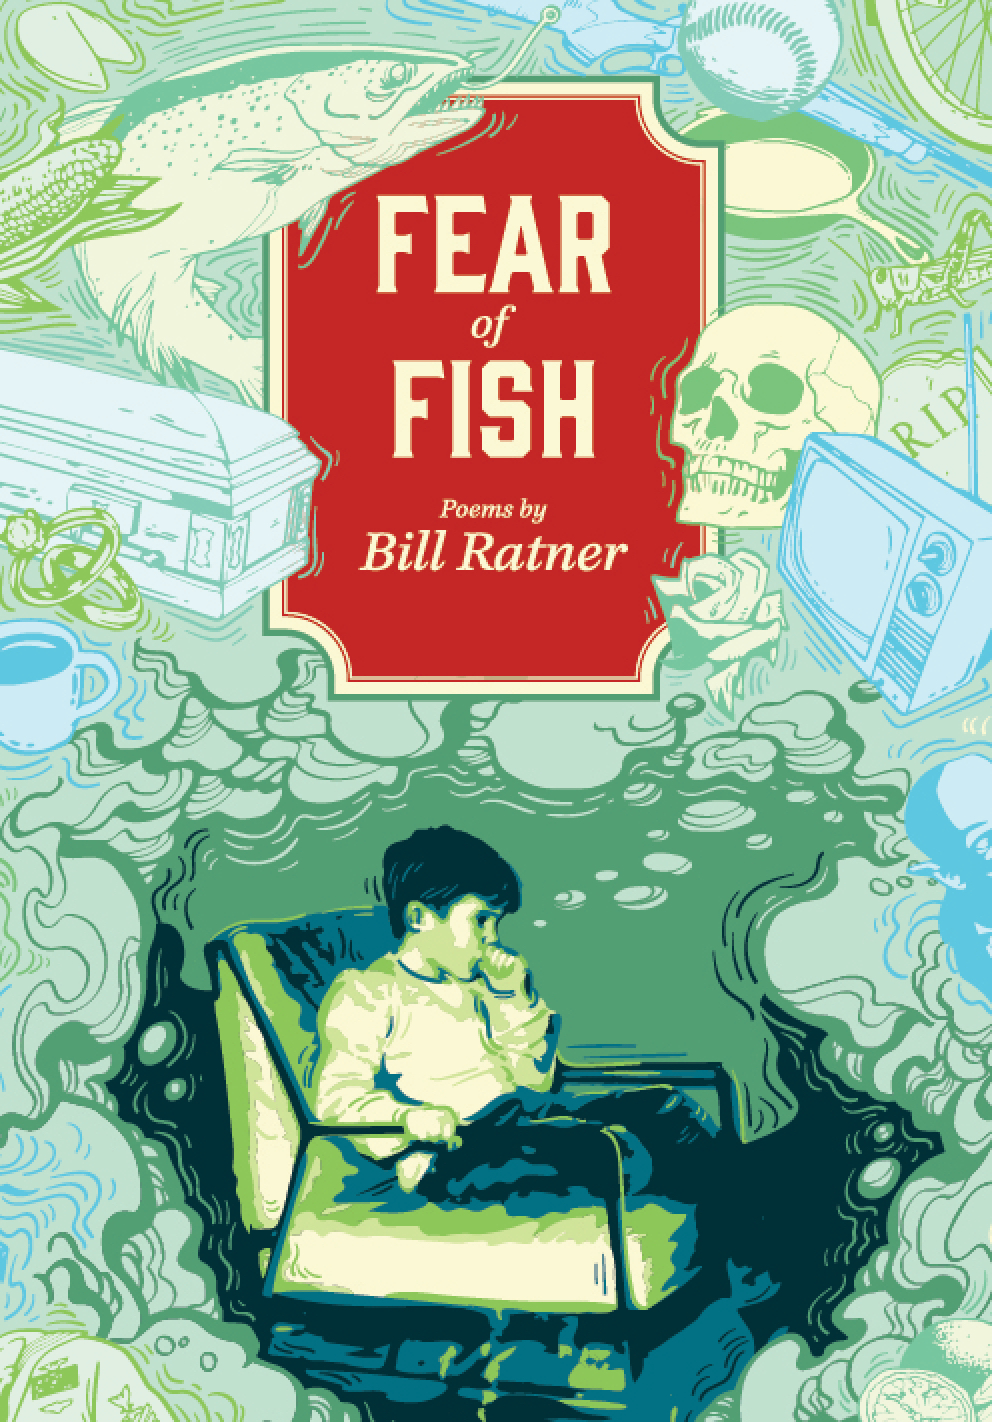 Front cover of poetry collectionn Fear of Fish by Bill Ratner, showing a youngster in a chair thinking--thought bubbles contain imagees of a skull, a fish, an old fashioned TV set